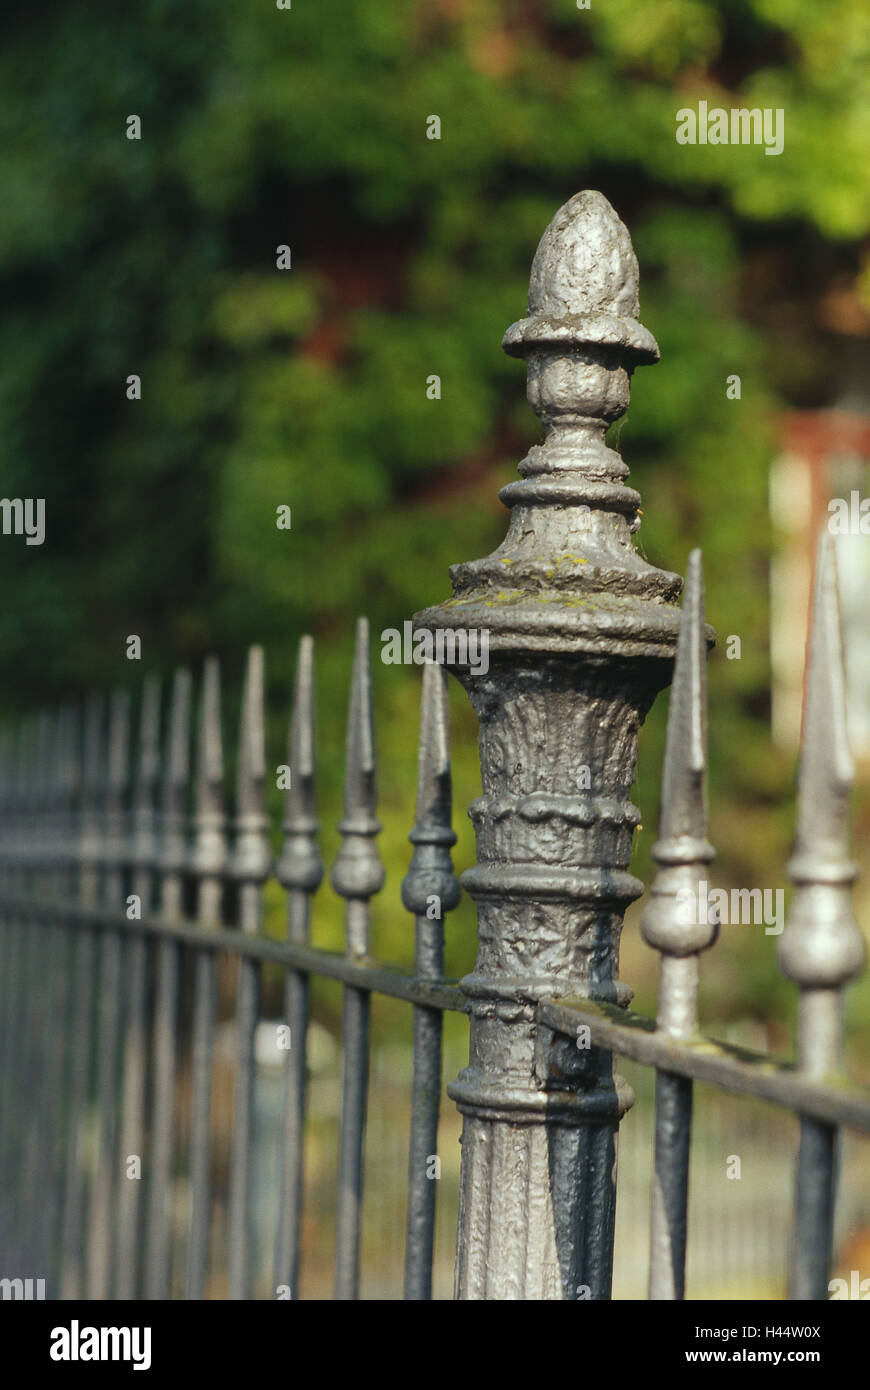 Iron fence, detail, garden, fence, fence post, pole, pointed ...